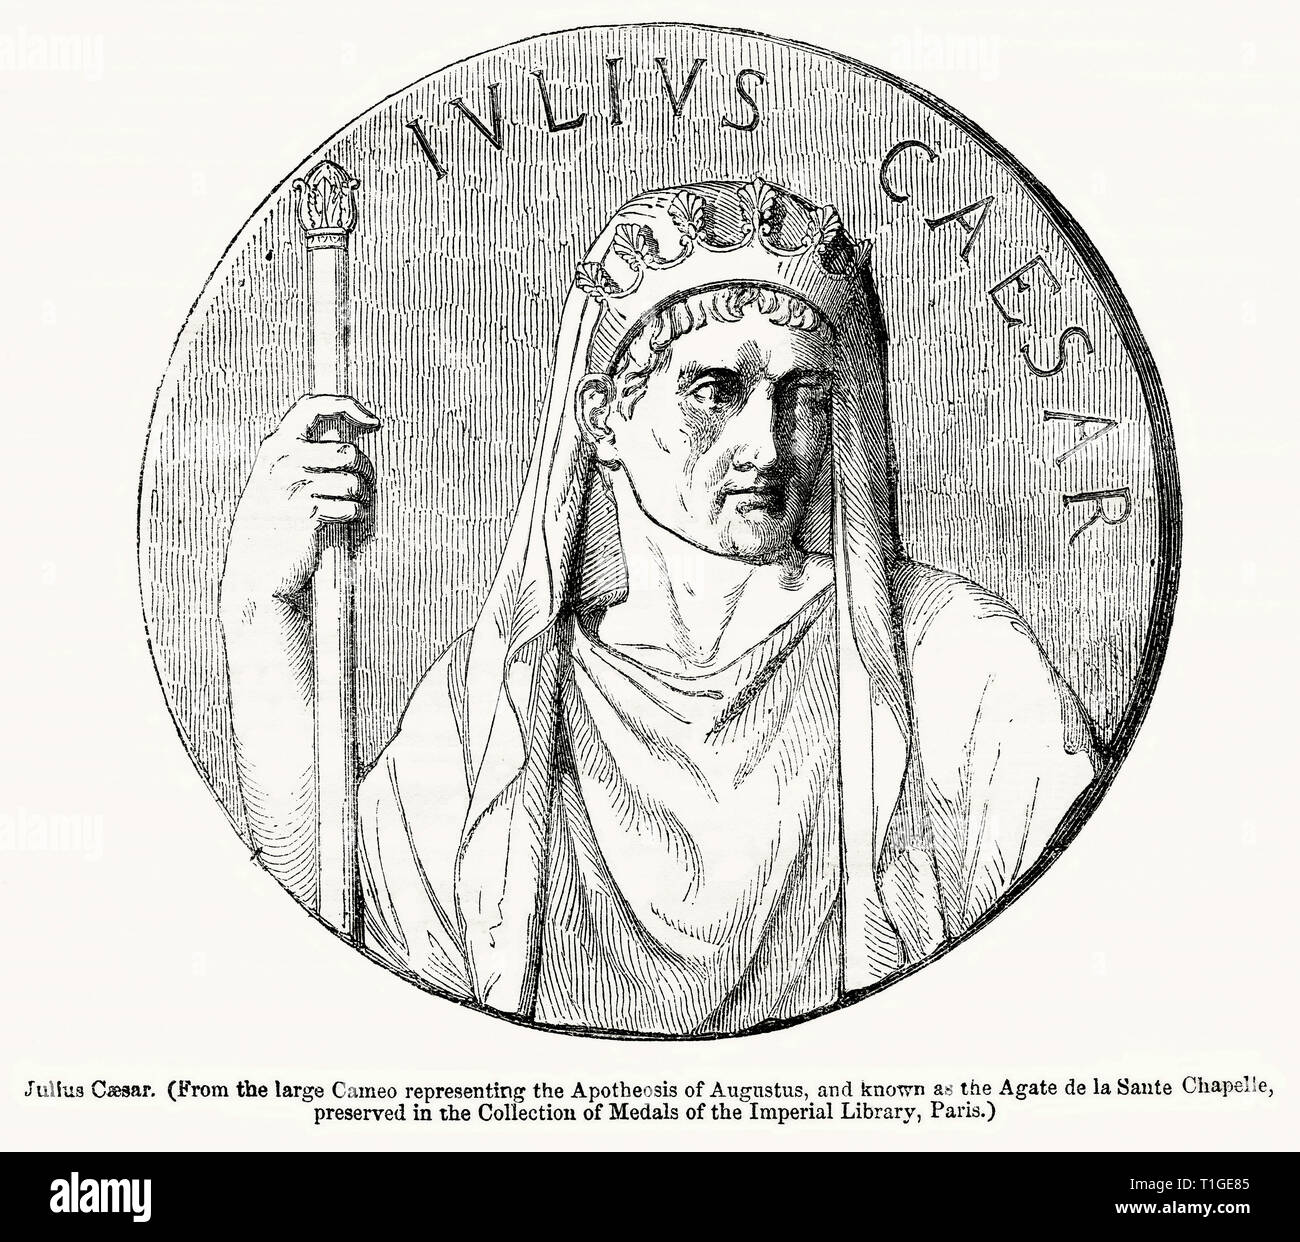 Julius Caesar (From the large Cameo representing the Apotheosis of Agustus, and known as the Agate de la Sante Chapelie, preserved in the Collection of Medals of the Imperial Library, Paris), Illustration from John Cassell's Illustrated History of England, Vol. I from the earliest period to the reign of Edward the Fourth, Cassell, Petter and Galpin, 1857 Stock Photo